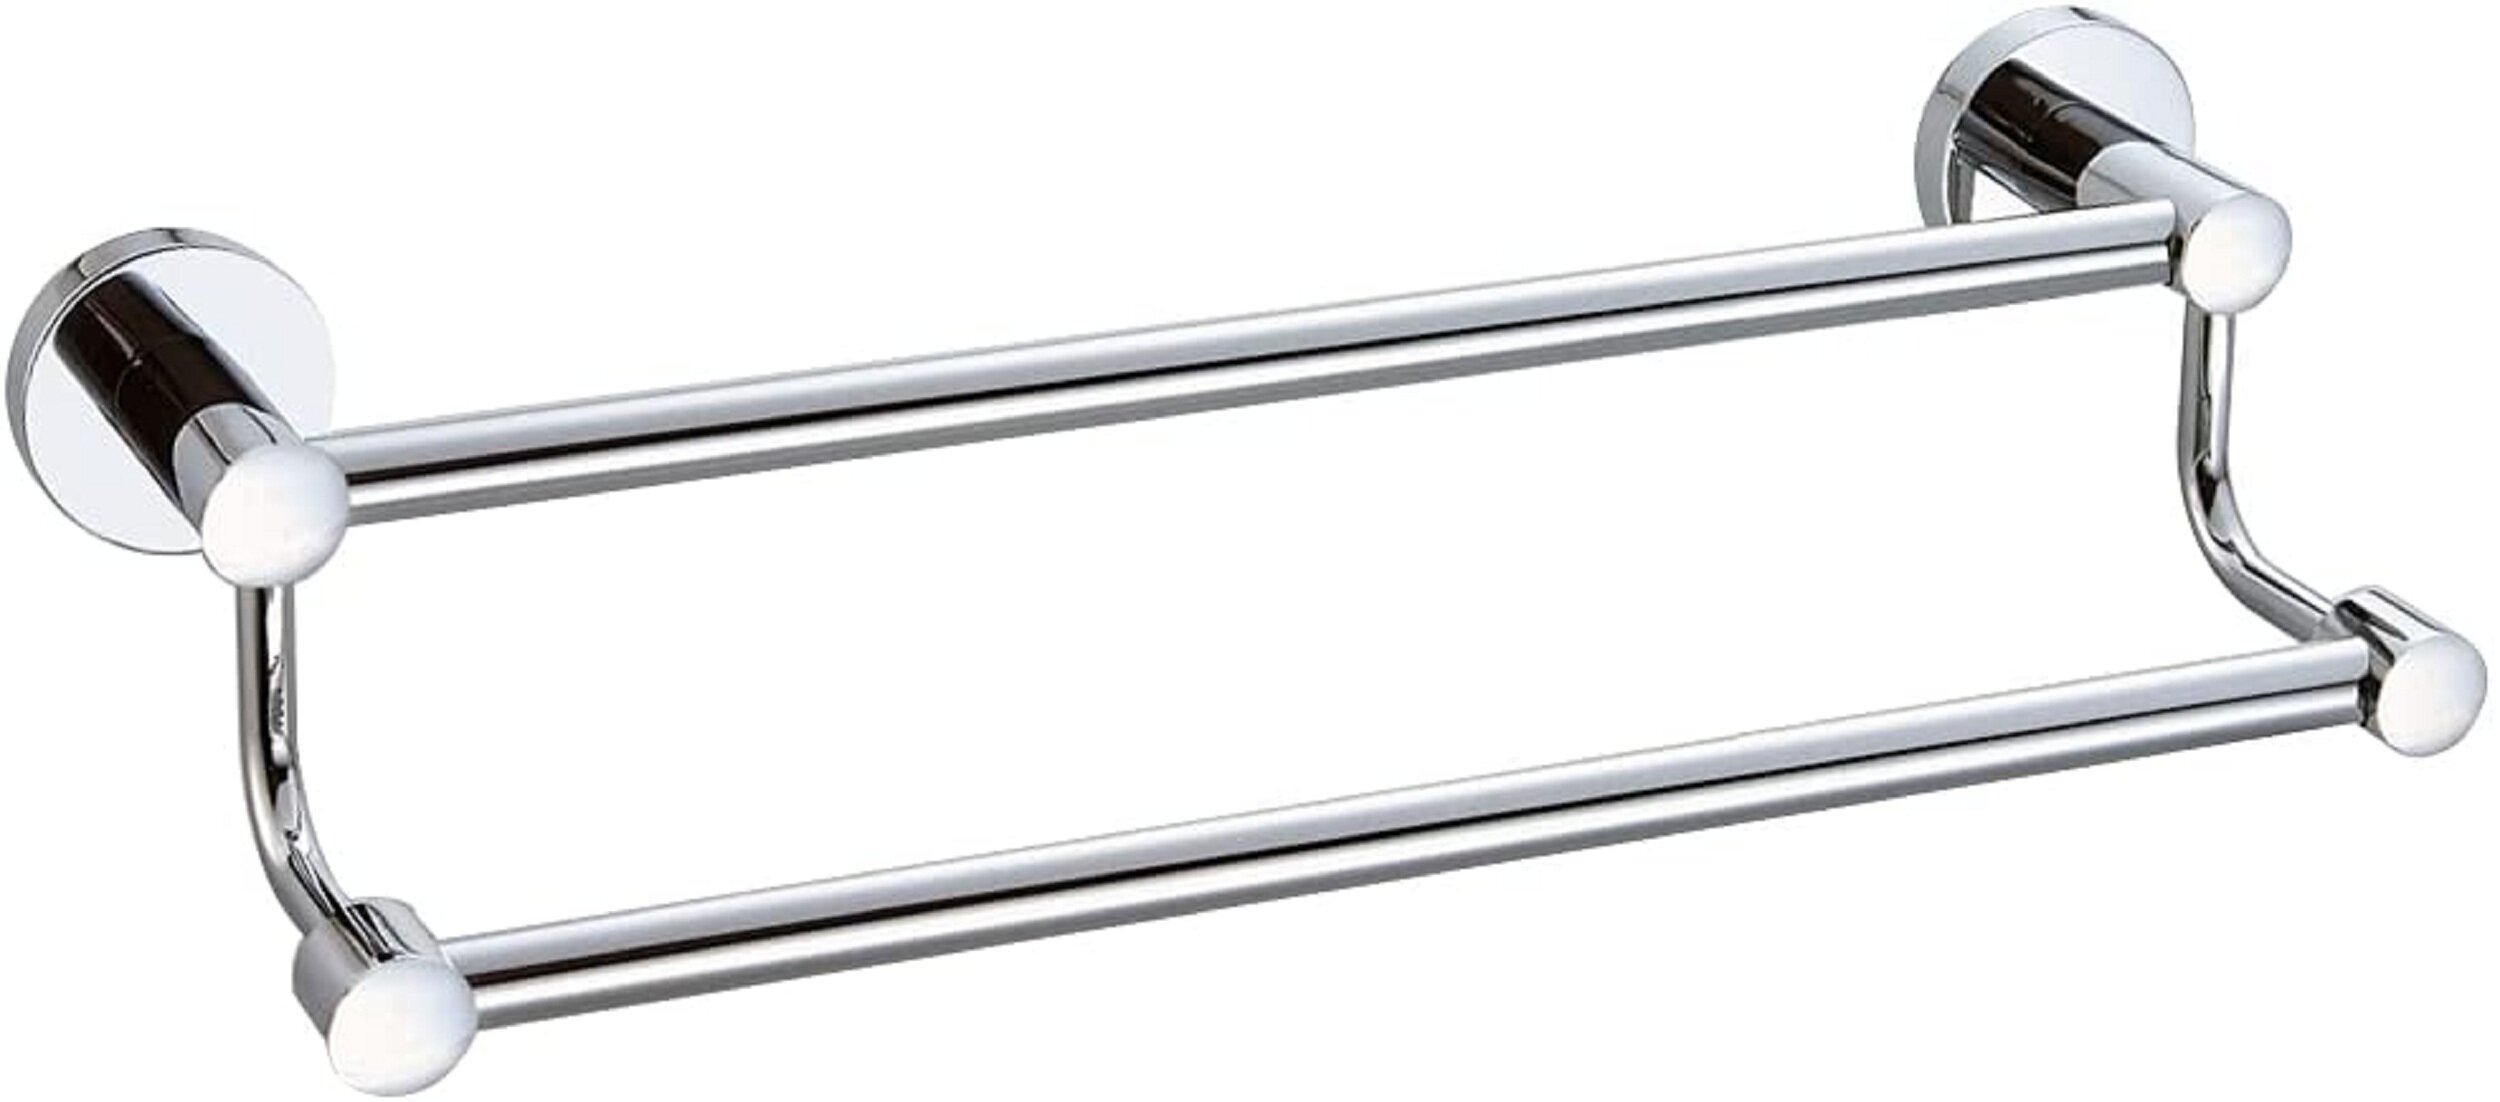 Premium Collection Polished Chrome Free Returns Double Towel Bar  by Josef 